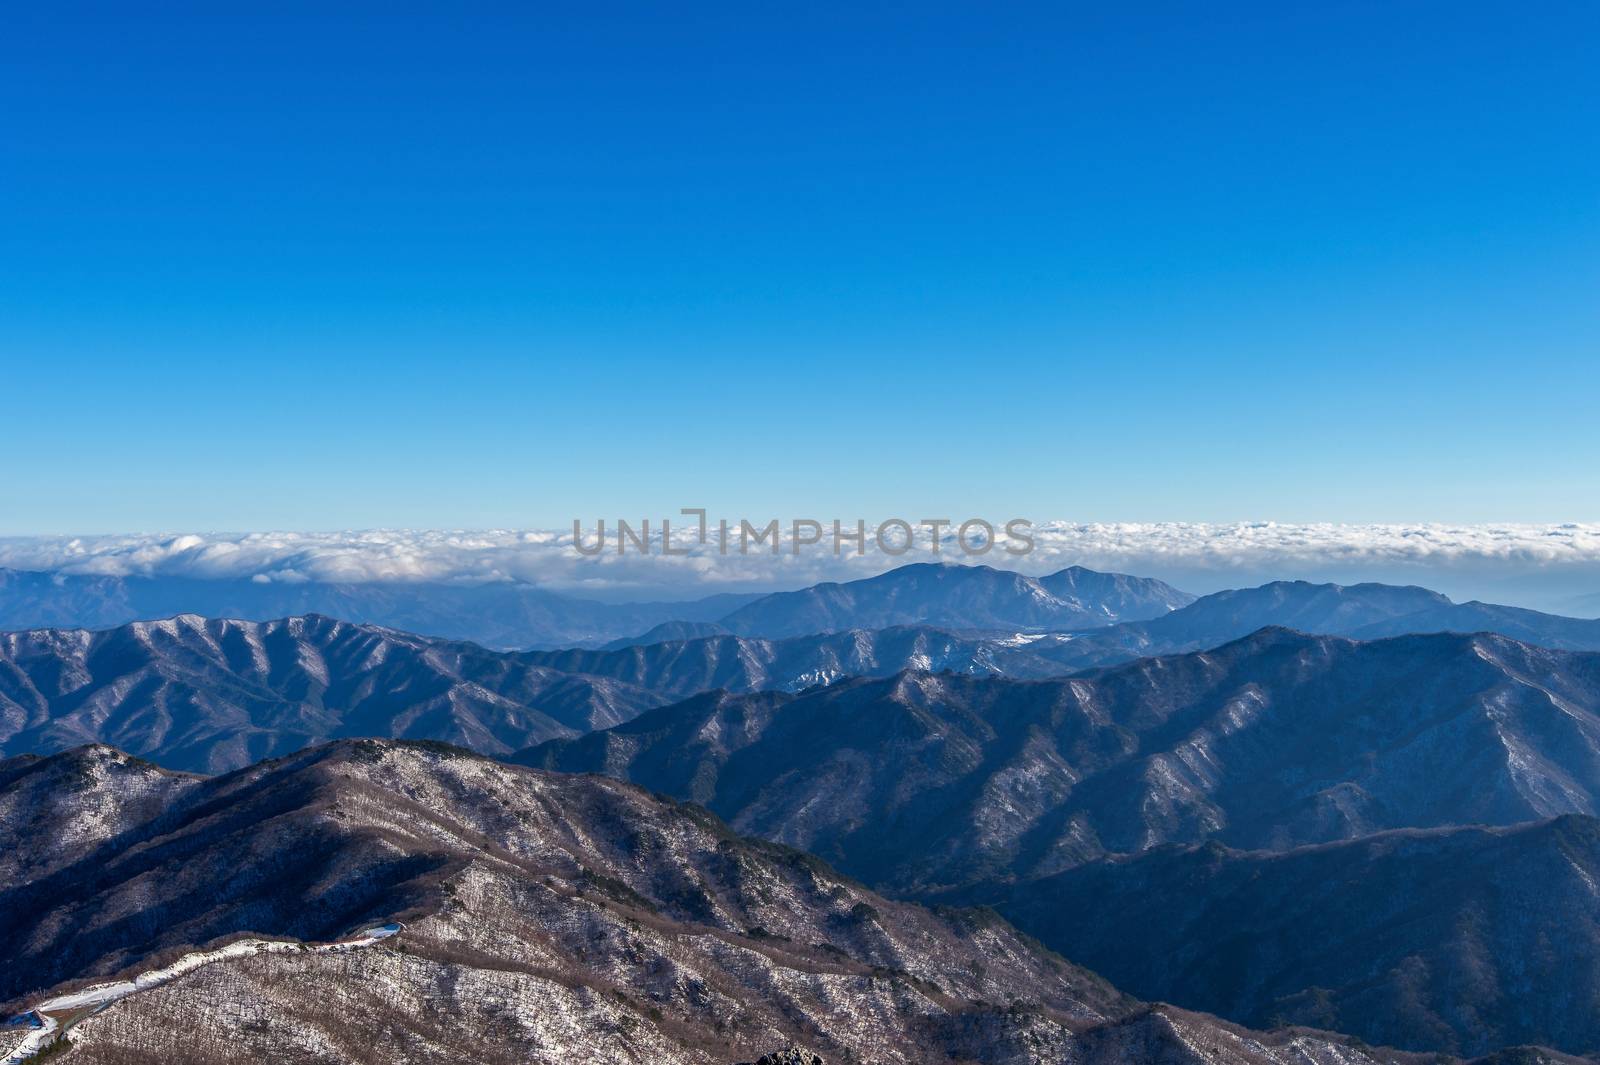 Deogyusan mountains is covered by snow and morning fog in winter,South Korea.